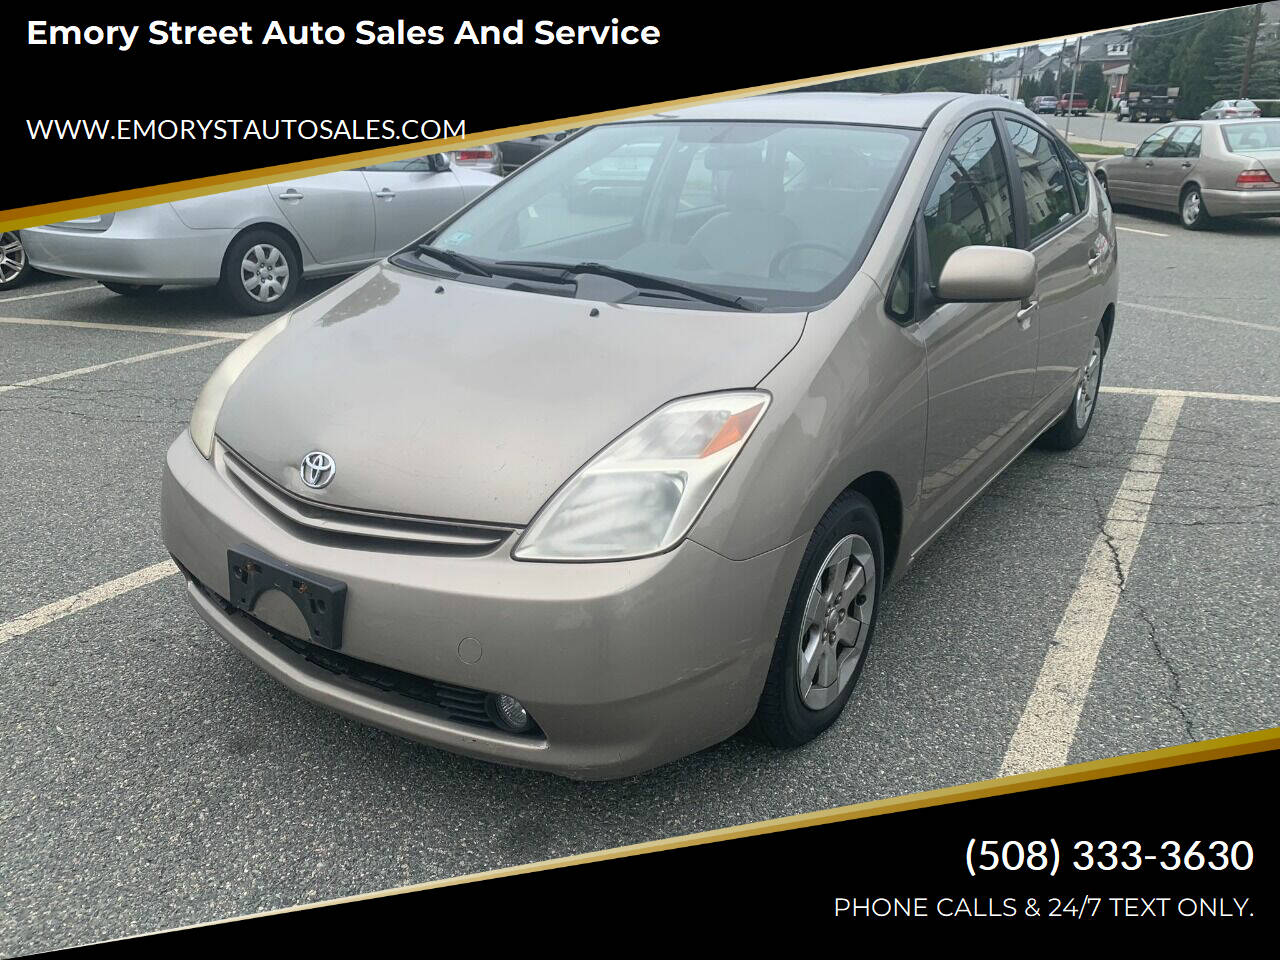 2006 toyota prius hybrid for sale by owner - Saint Paul, MN - craigslist